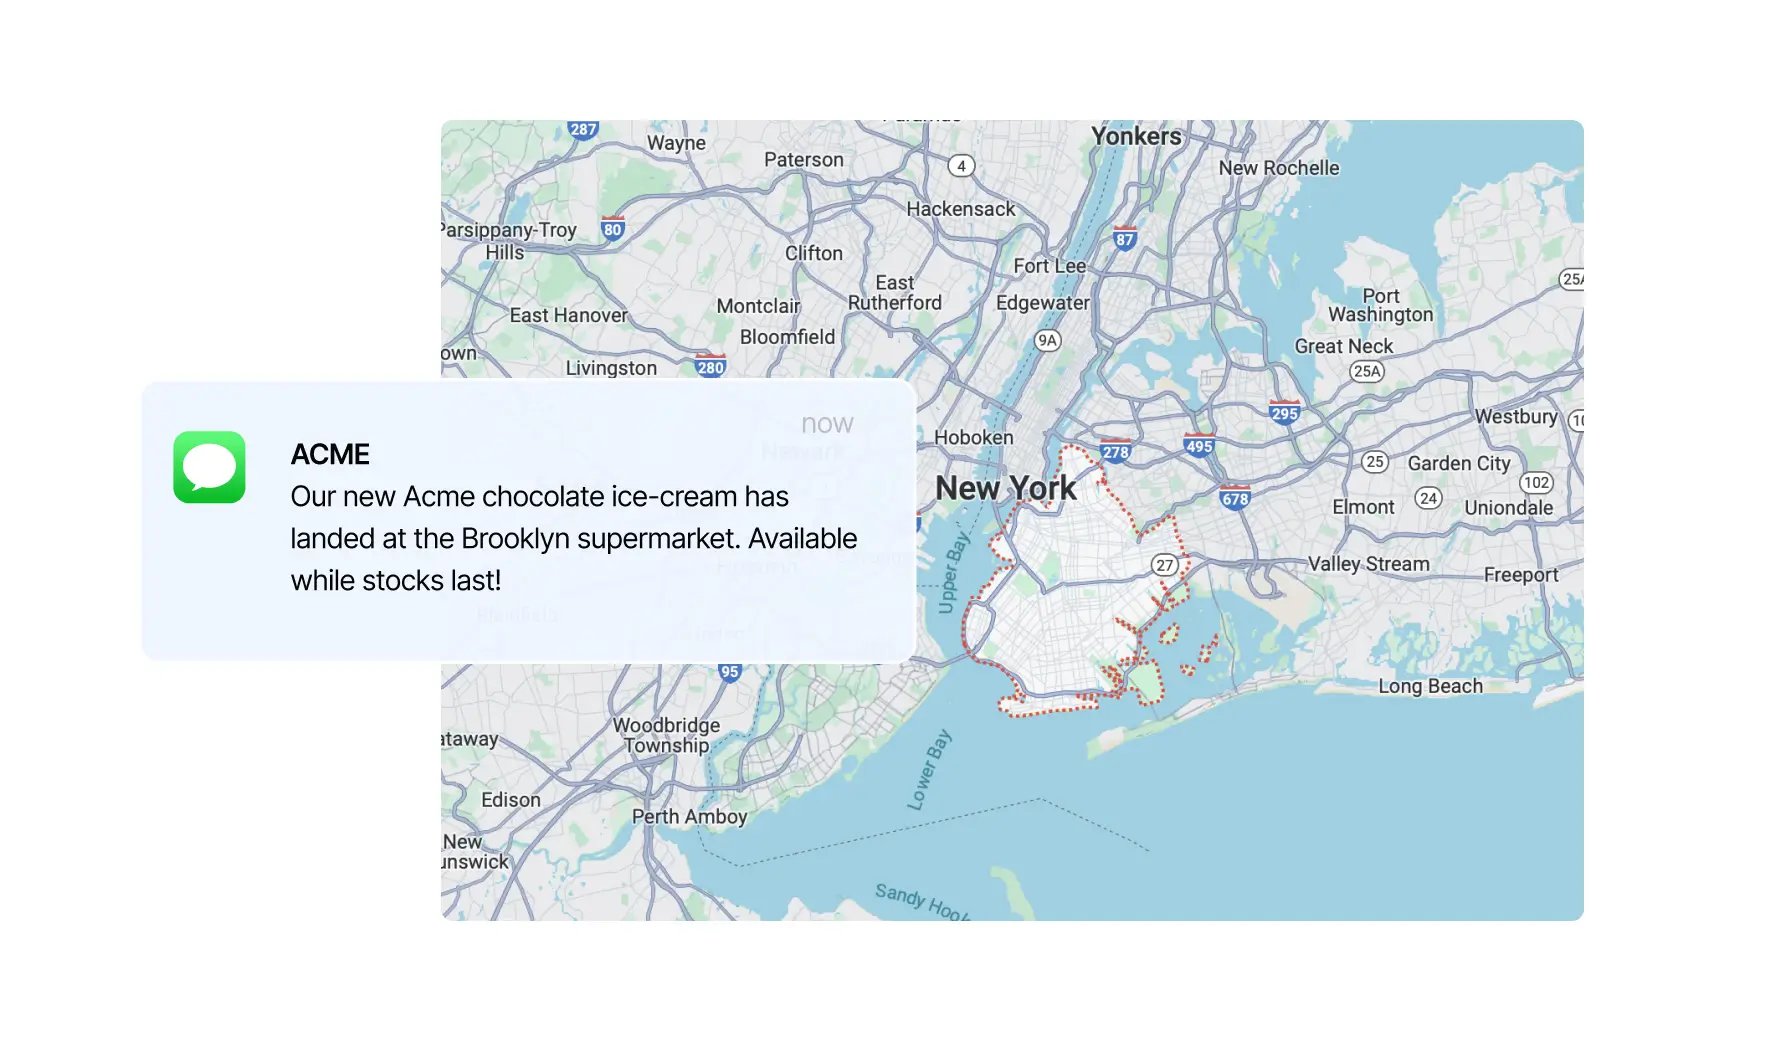 map of NY showing segmented audience getting an sms about cpg product